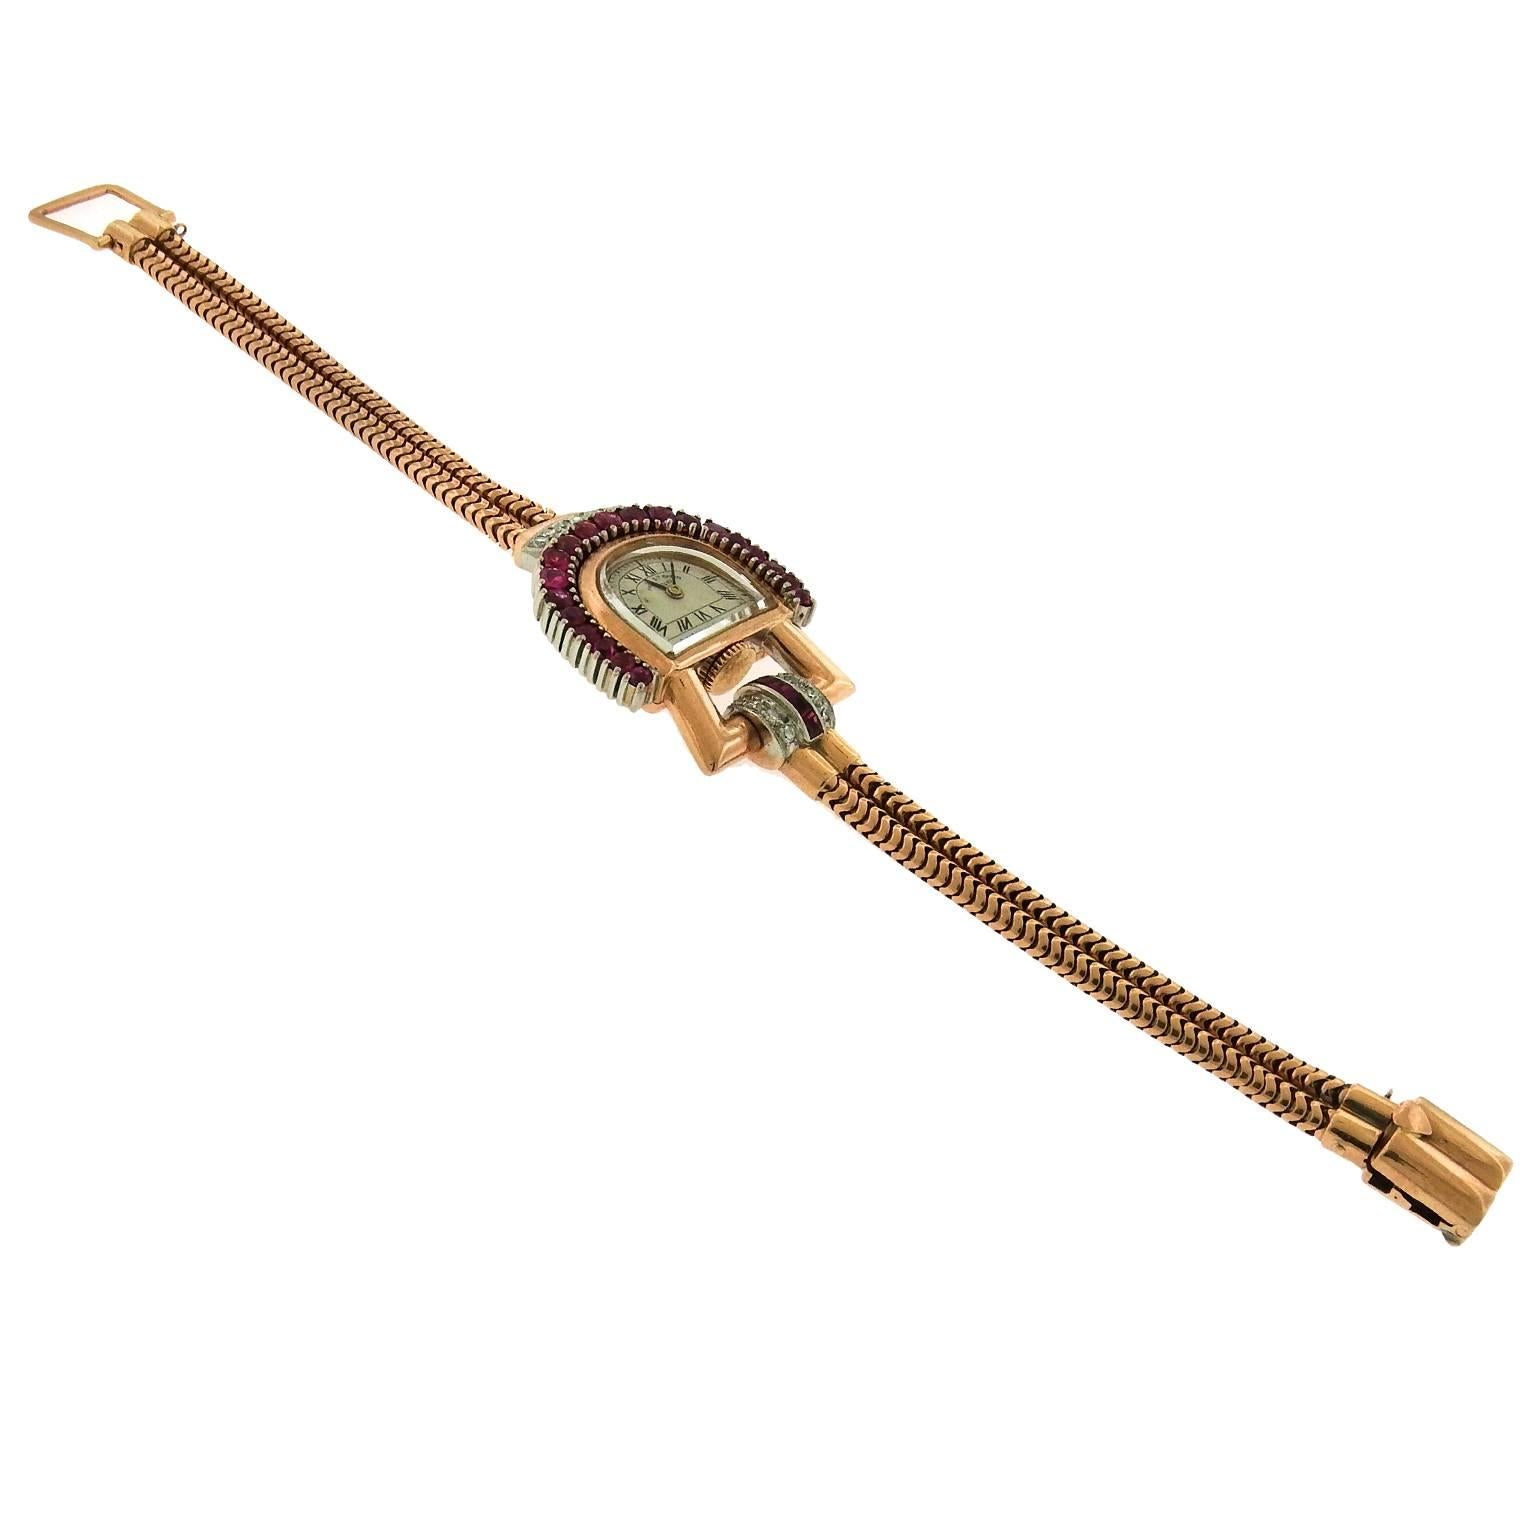 18K pink gold, ruby and diamond asymmetrical Swiss wristwatch in stirrup-style is wonderfully stylized example of the Retro-Modern movement, circa 1940's,  influenced by Art Deco and industrial design.  The overall case measures 27mm x 36mm, the